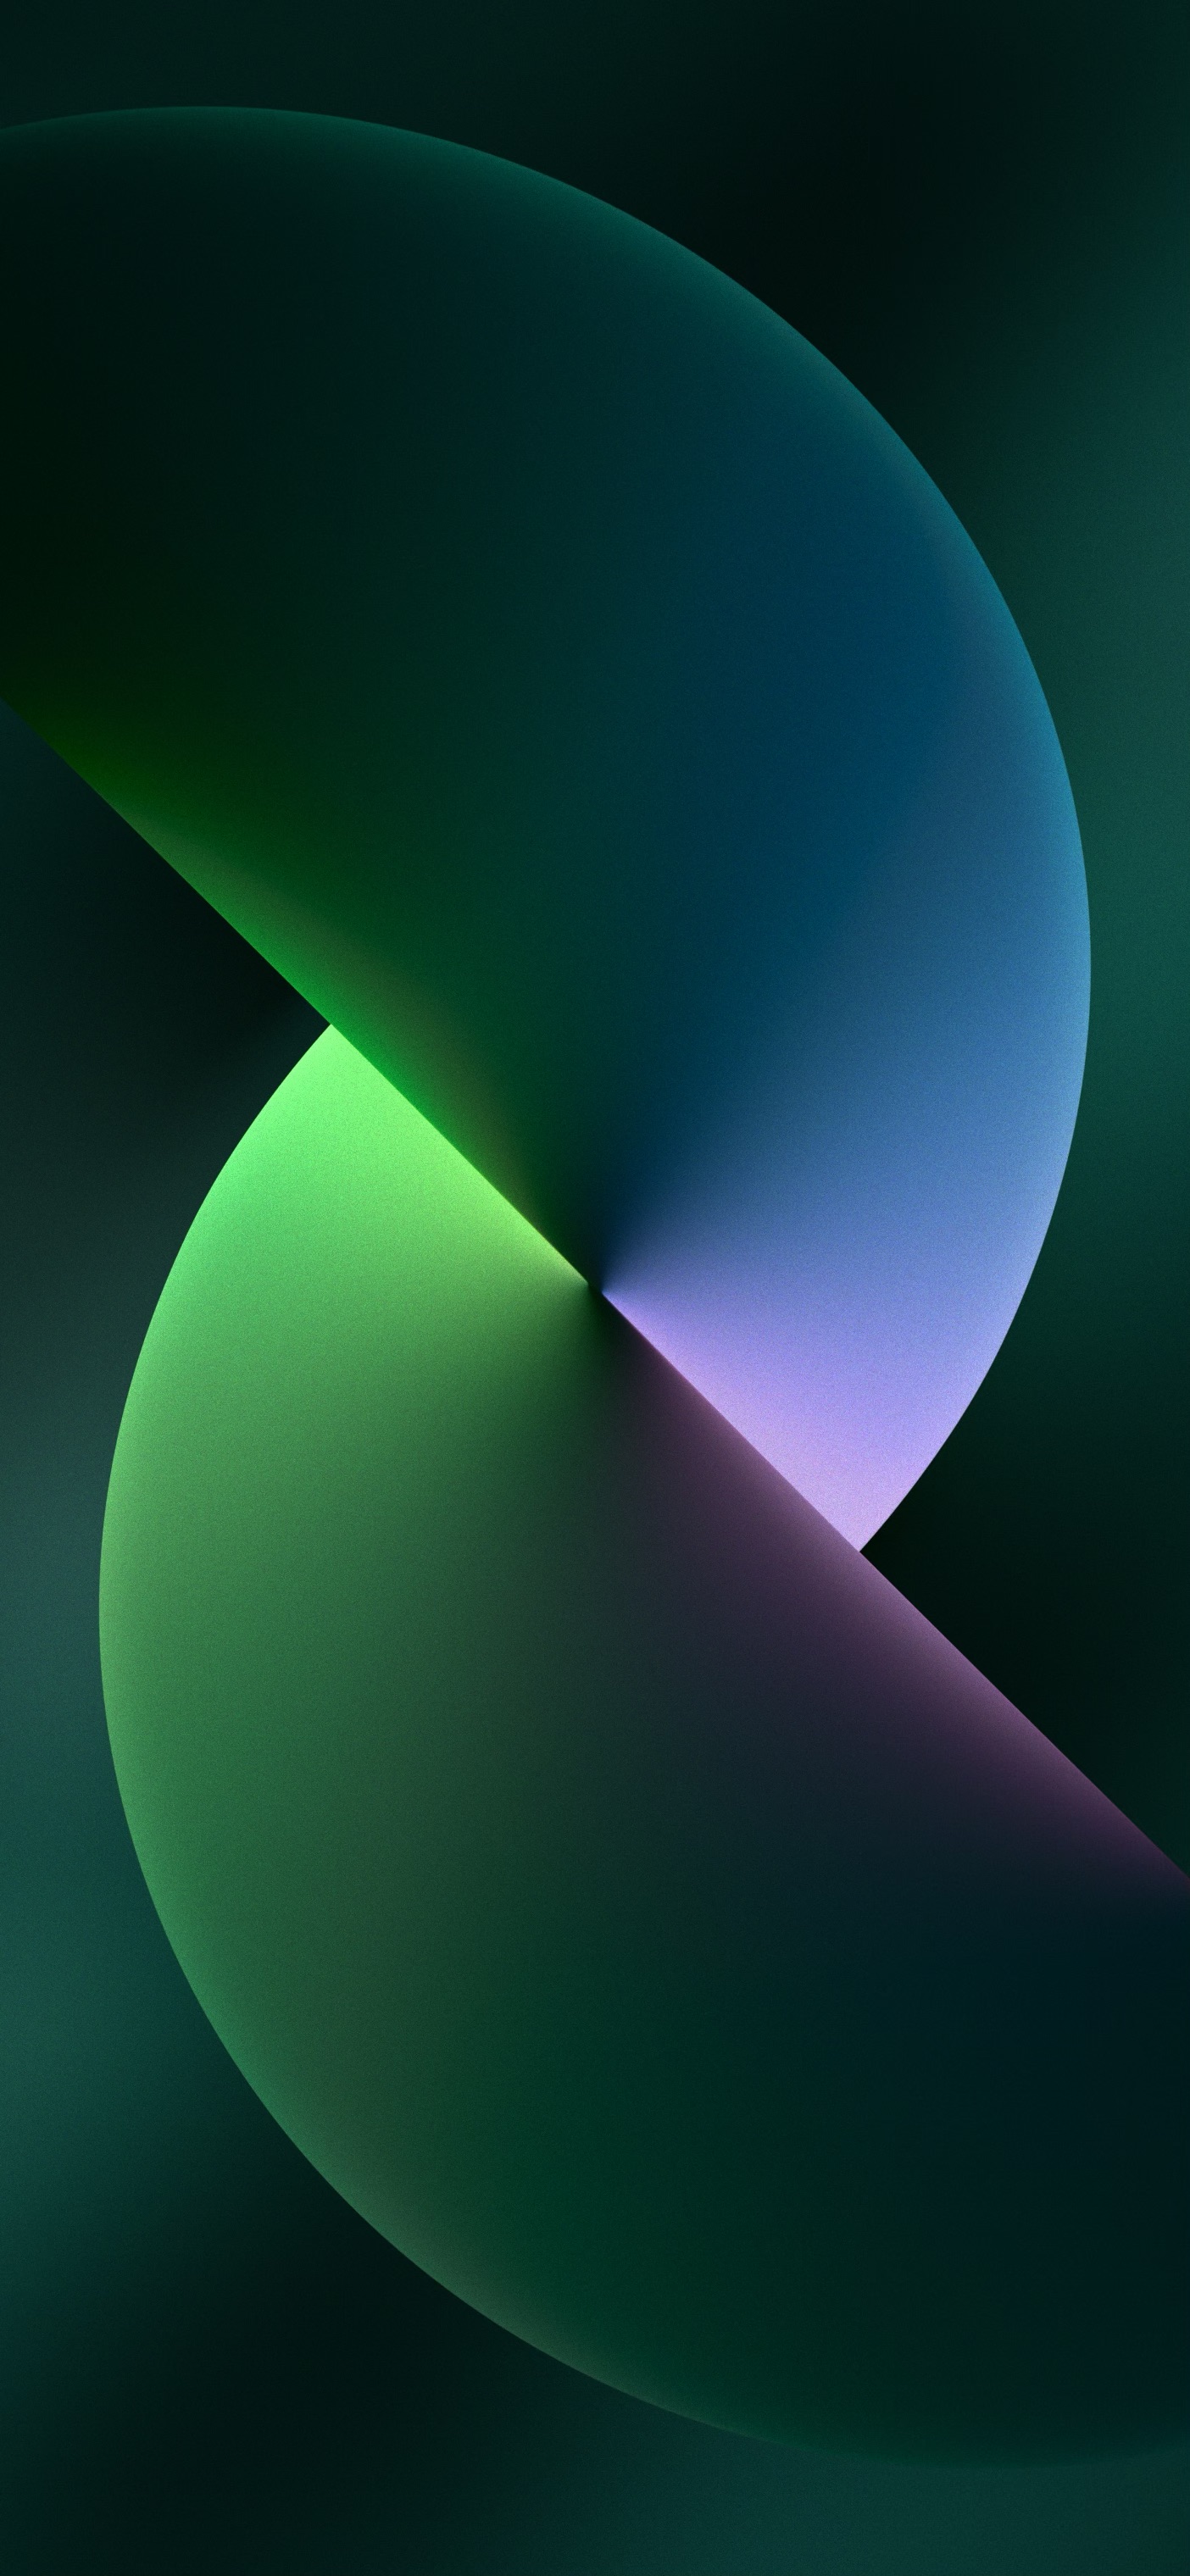 Download The New Green Iphone 13 Wallpapers Right Here 9to5mac